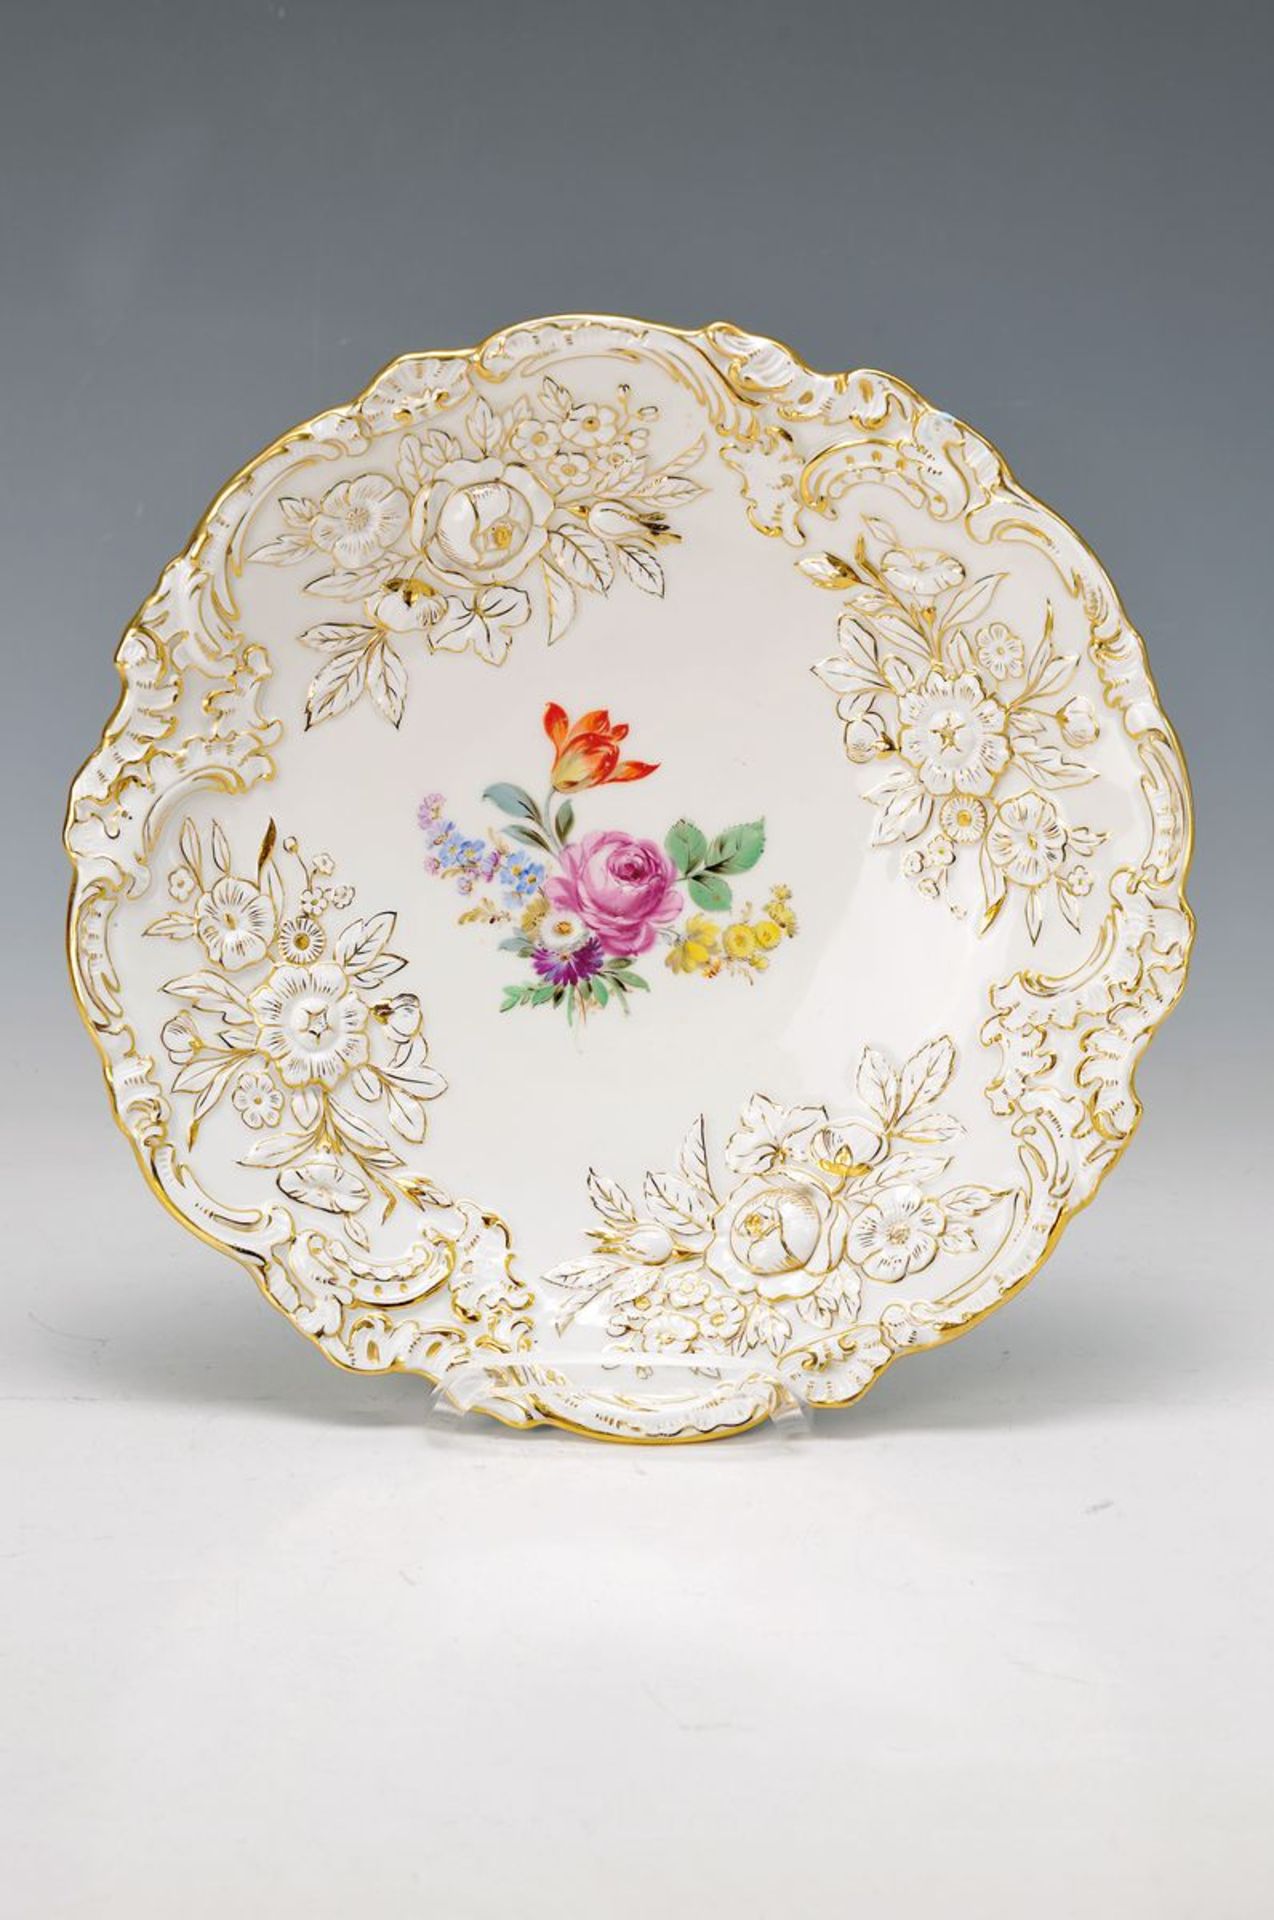 pompous plate, Meissen, 2nd half of the 19th century, floral embossment, painted with colorful